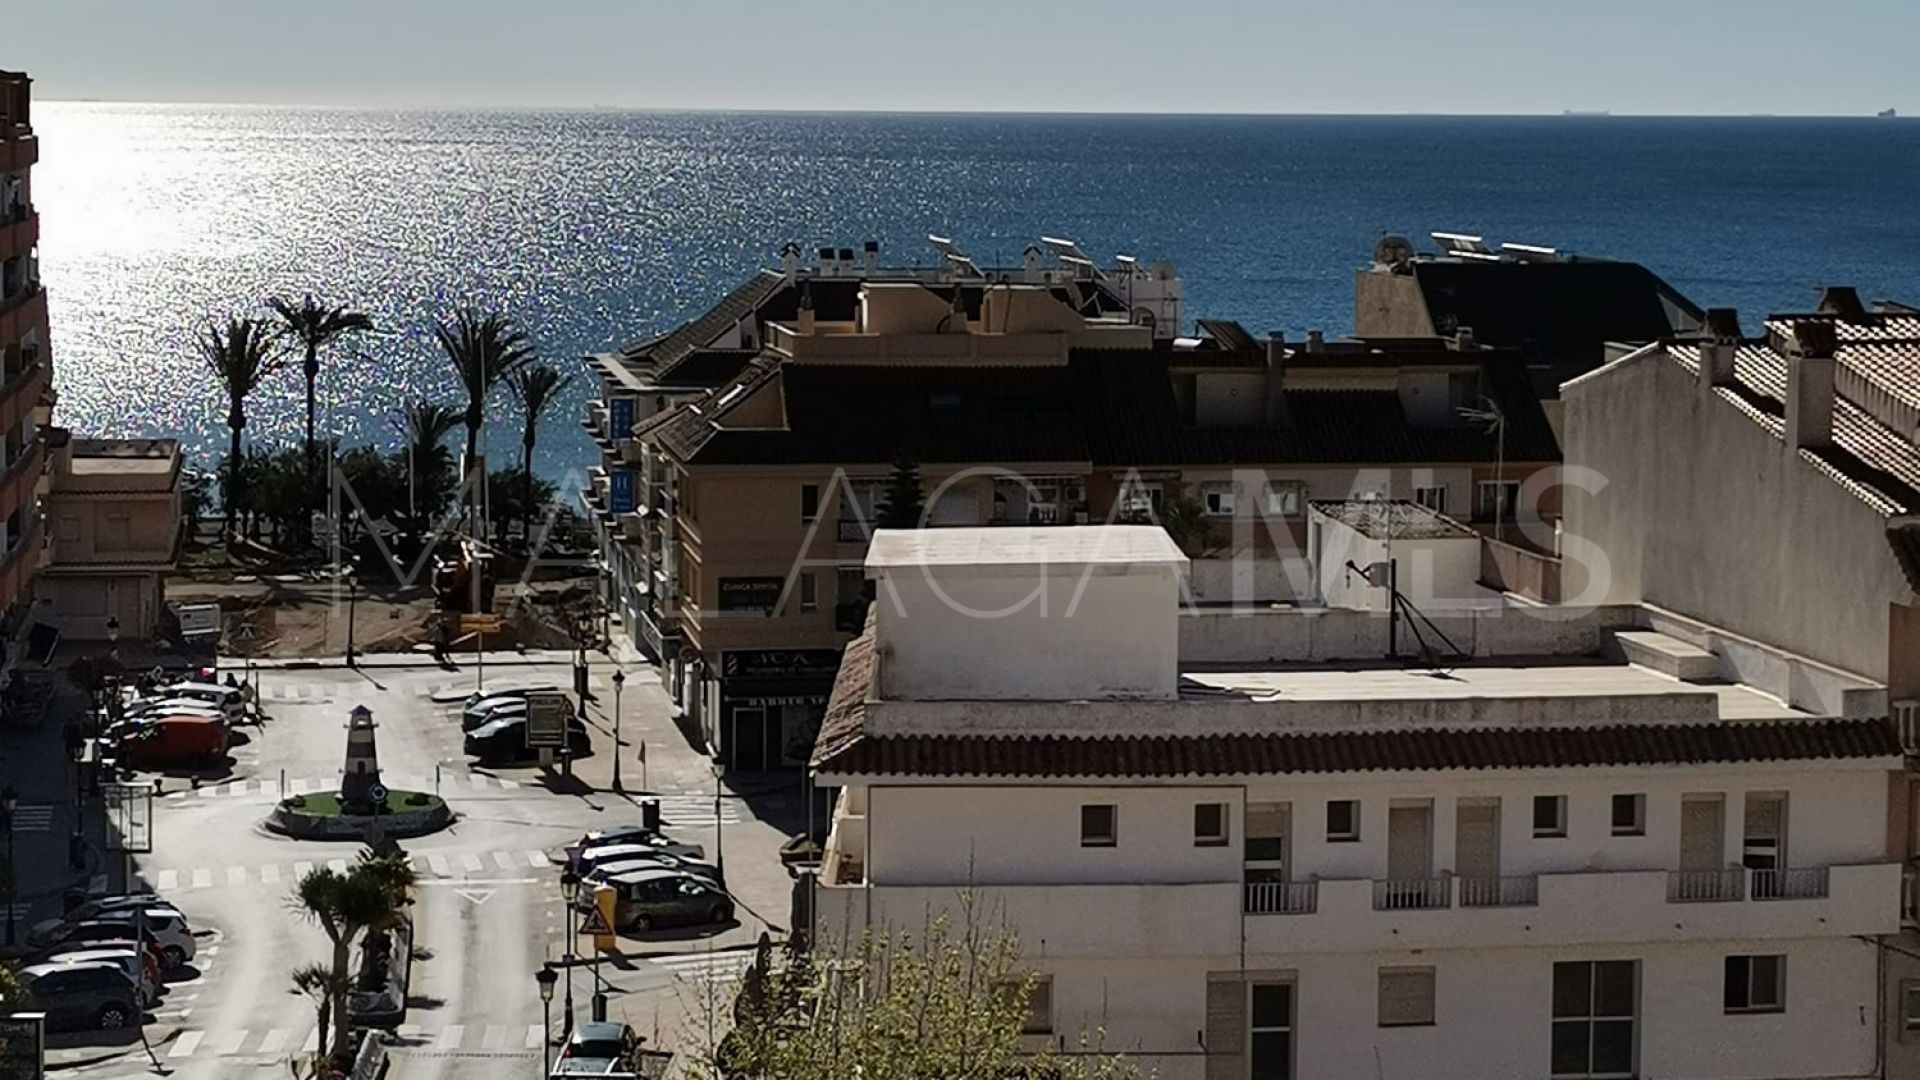 Apartment in Sabinillas for sale